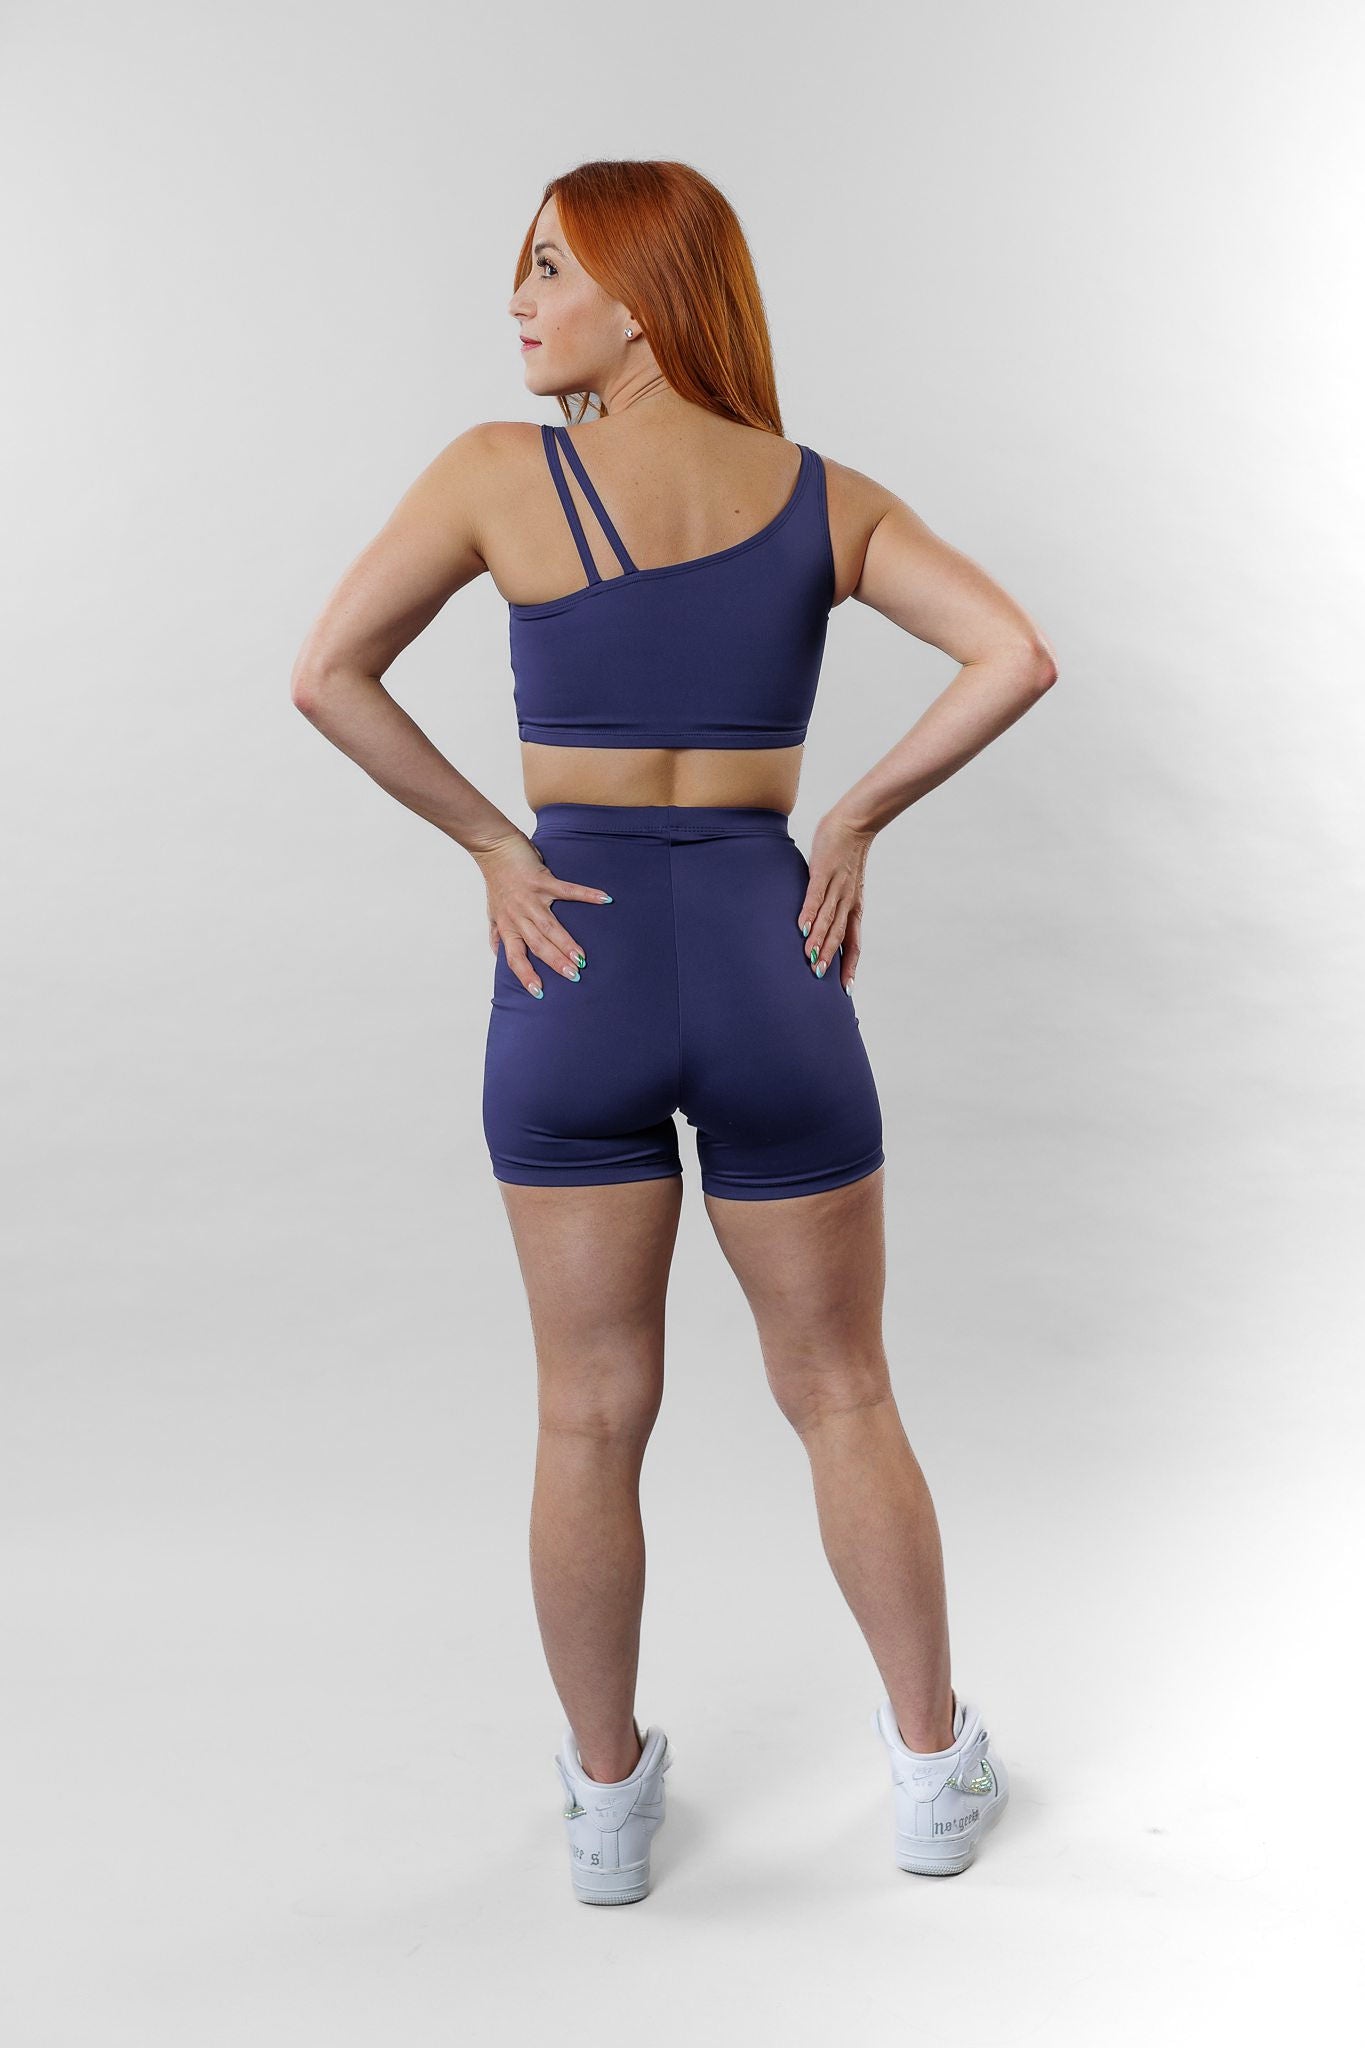 Ultra shorts by BLU for active women and kids by Opra Dancewear